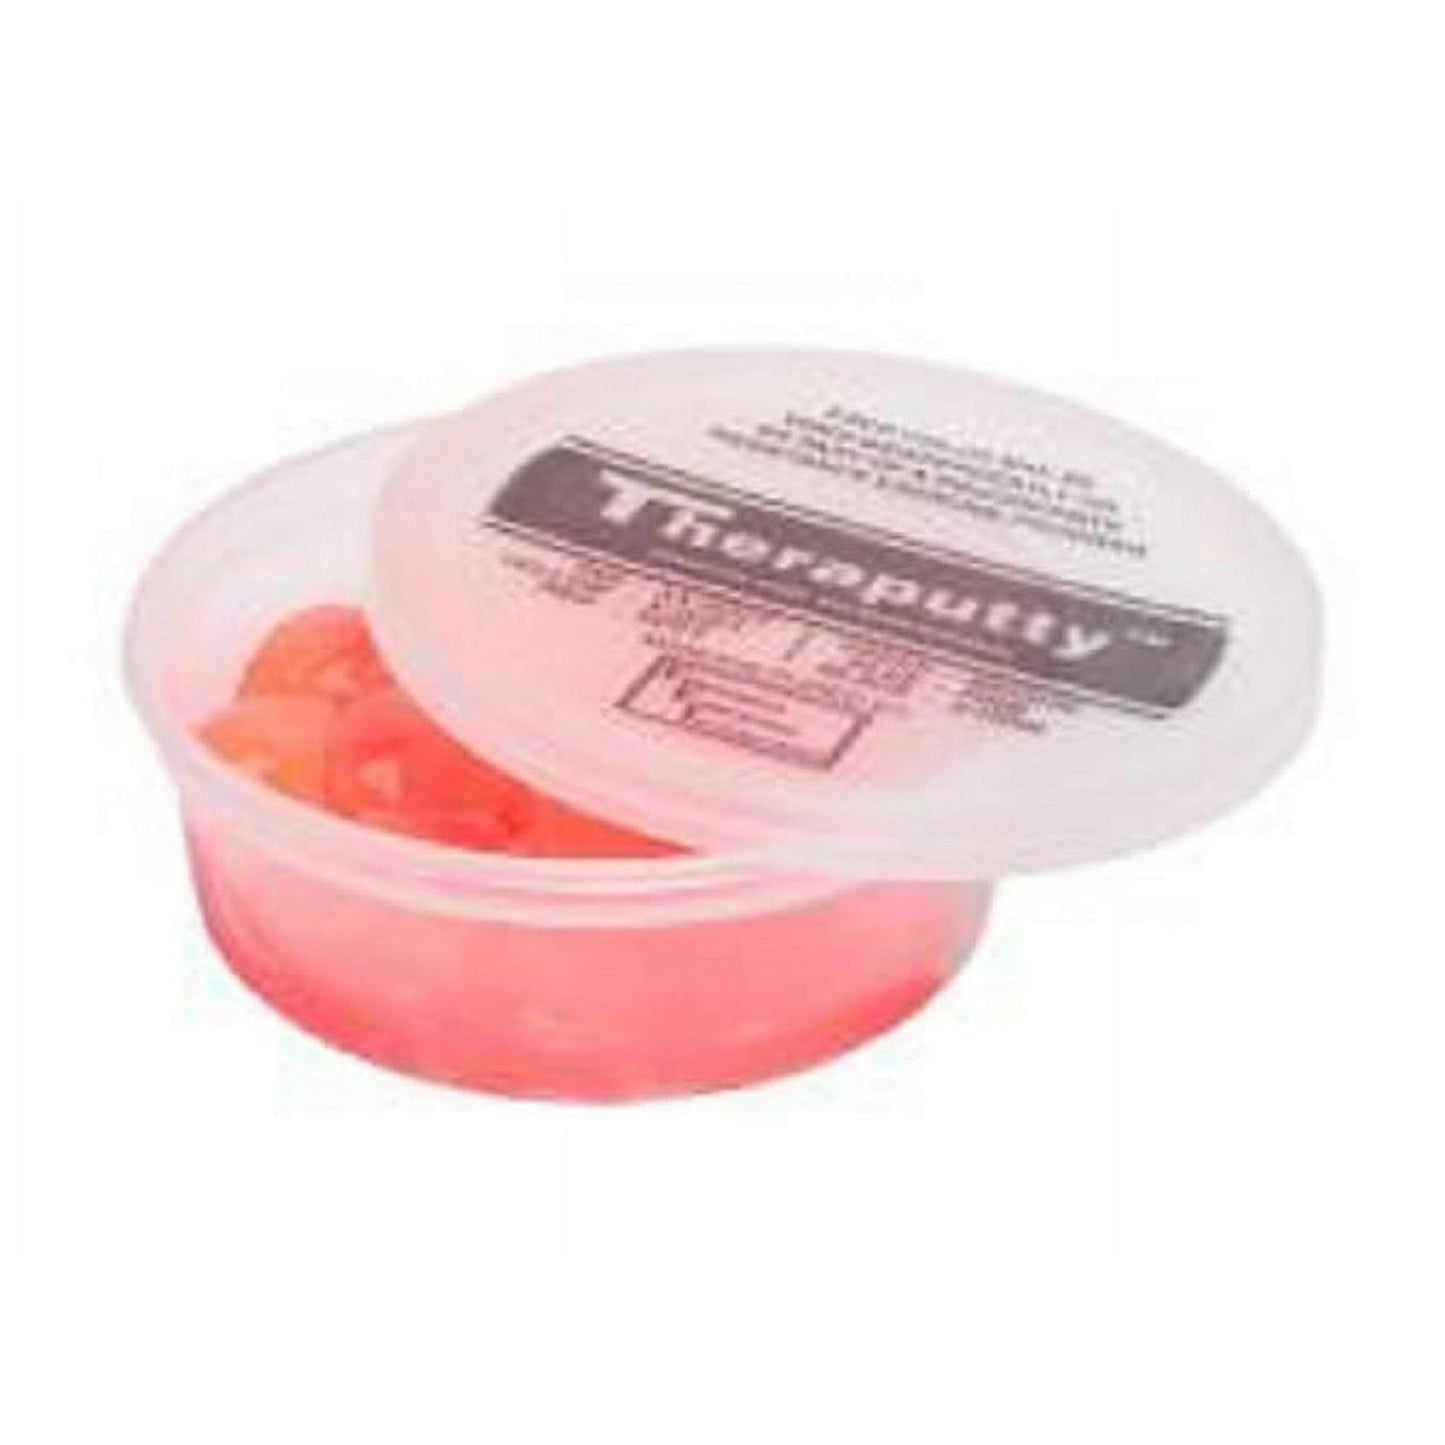 CanDo Theraputty Standard Exercise Putty, Red Soft, 2 oz